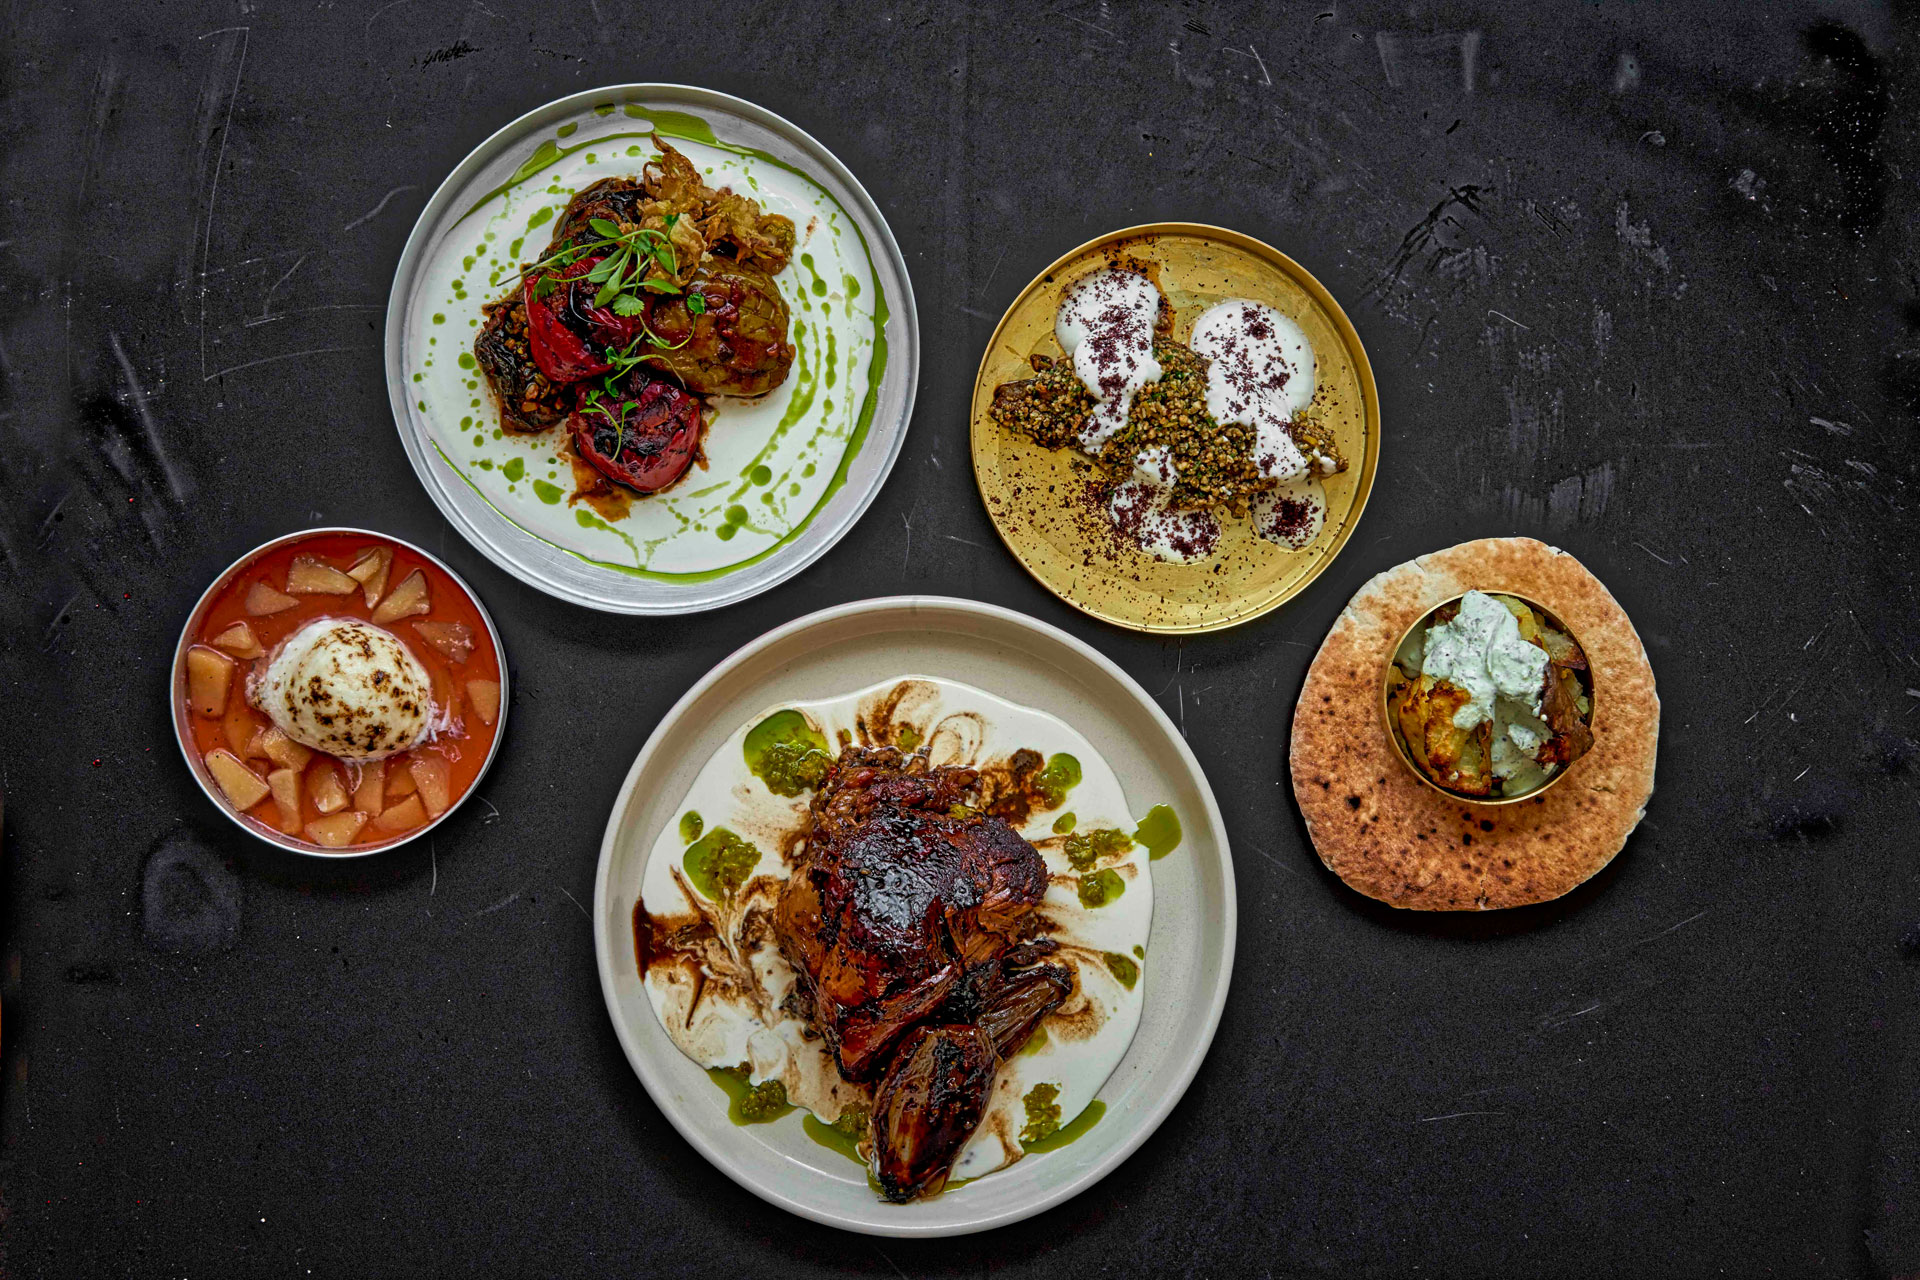 The New Tapas: Best Small Plates Restaurants in London